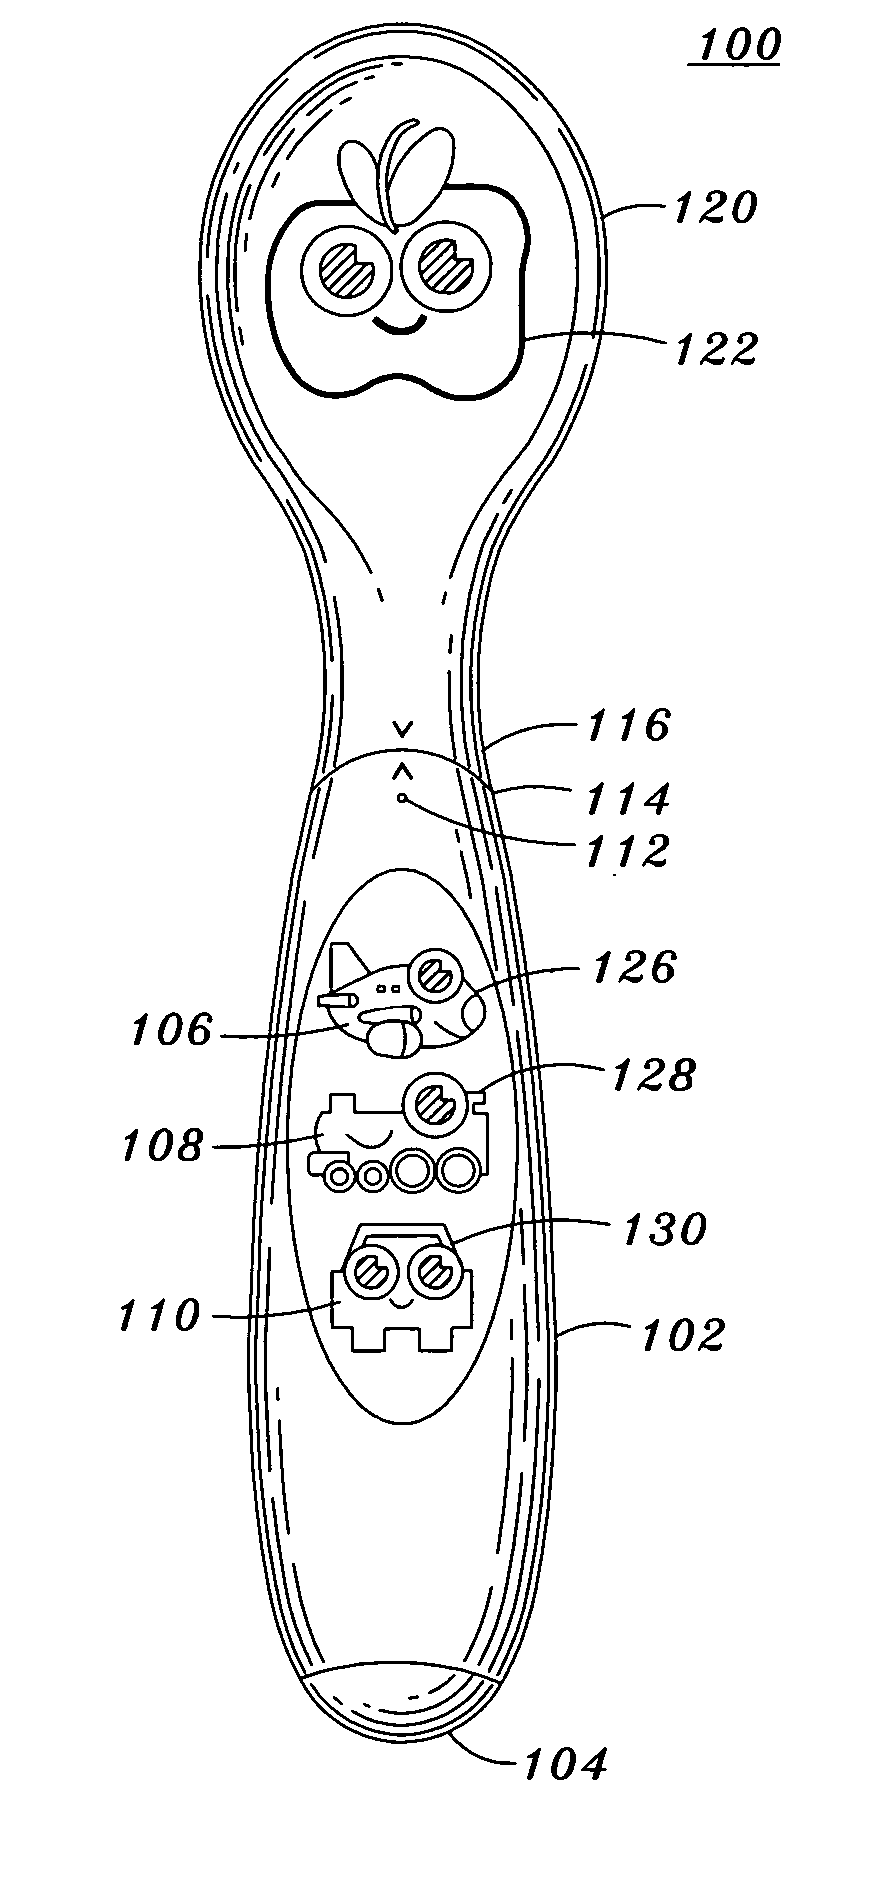 Feeding utensil with audio component